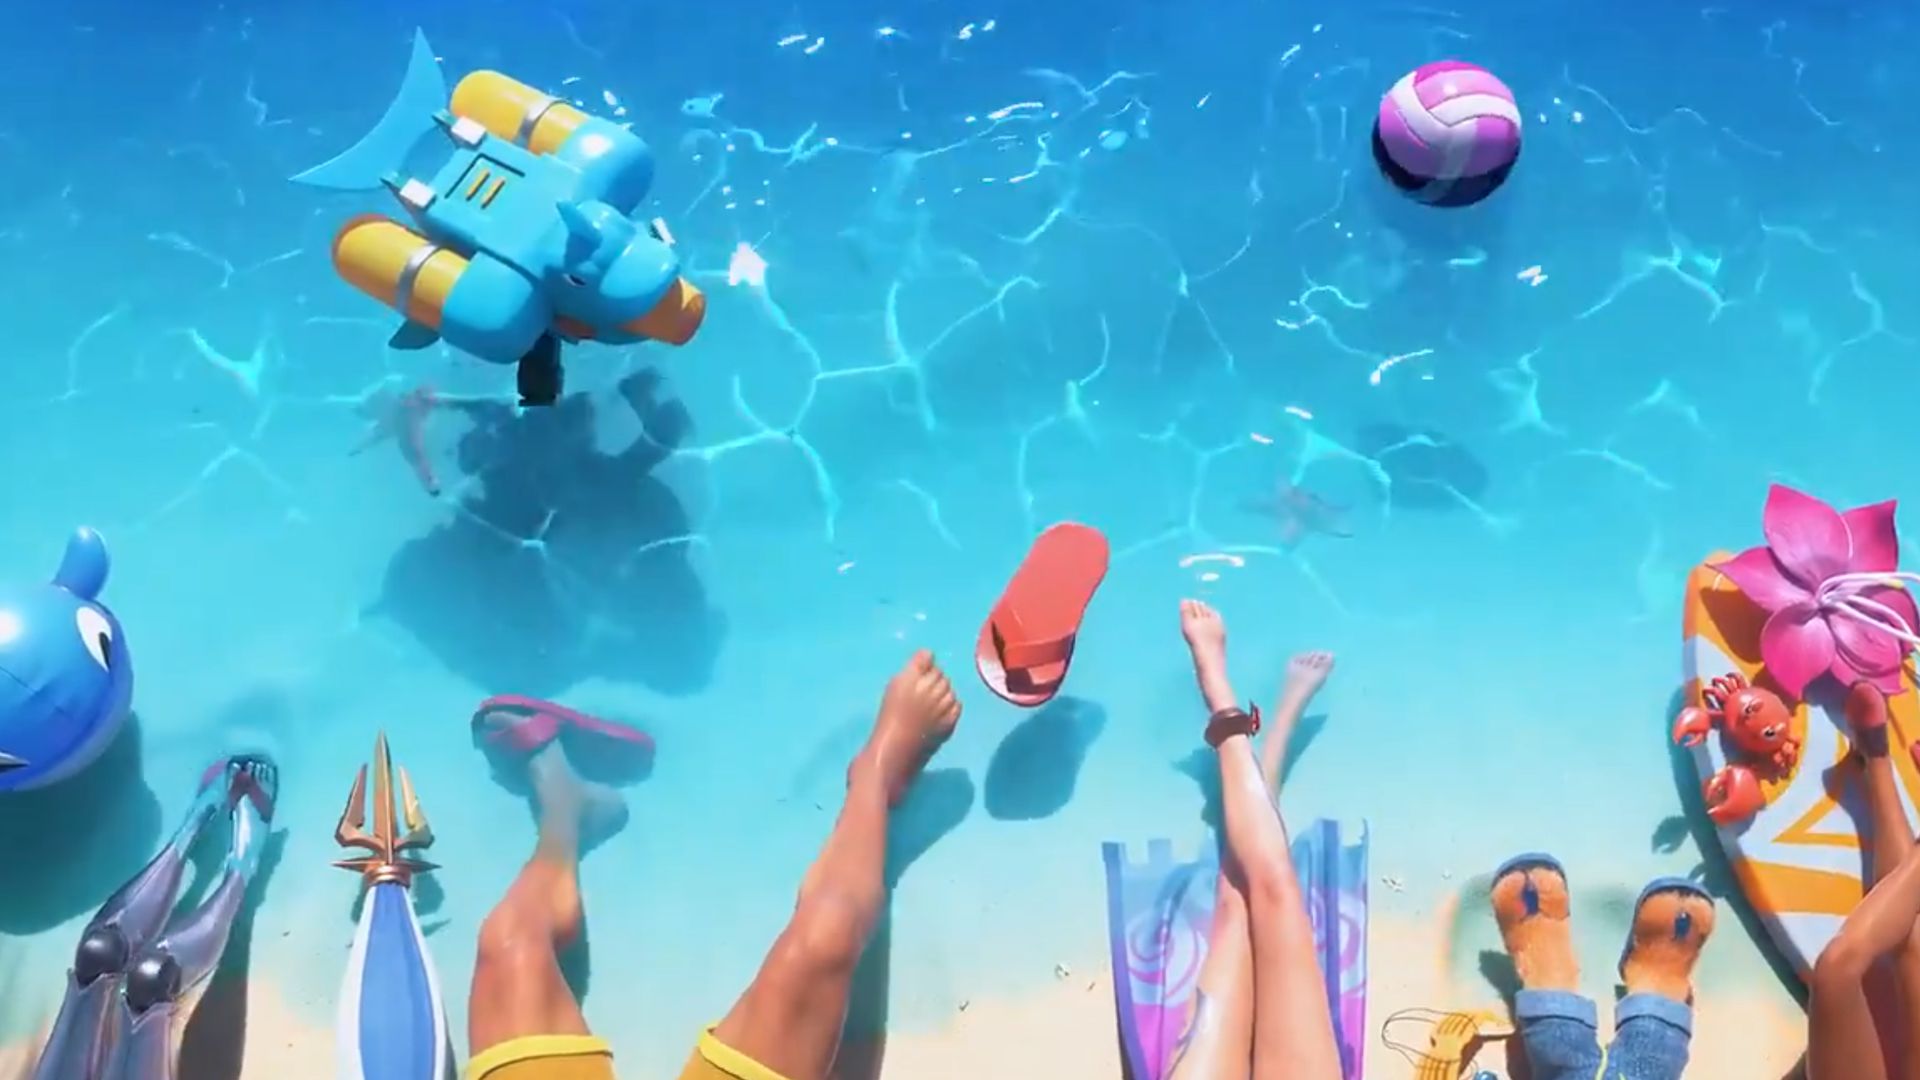 League Of Legends Makes A Splash With Its New Pool Party 2020 Skins Techradar